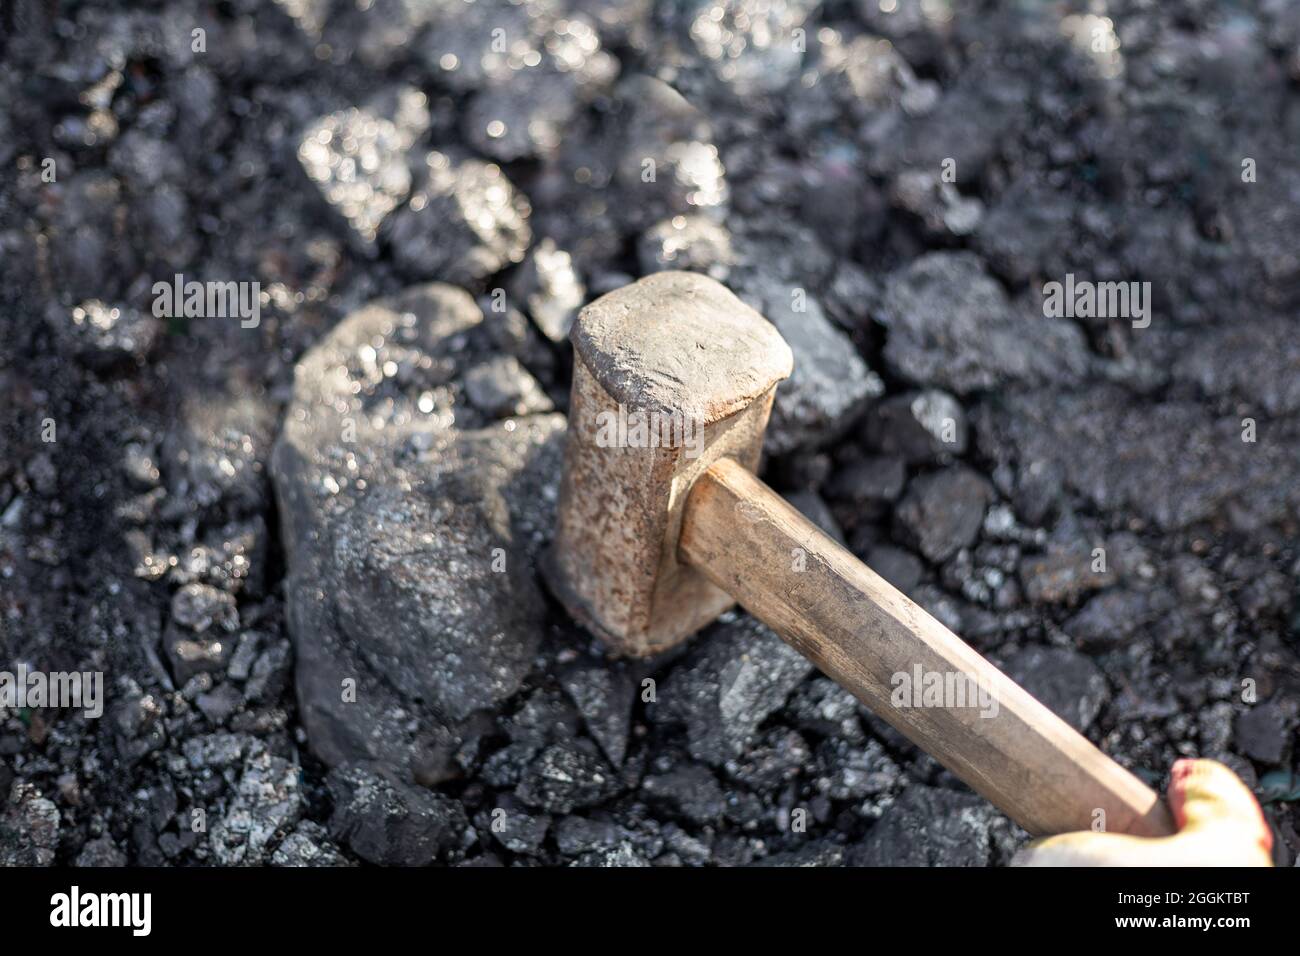 A man smashes large pieces of coal with a sledgehammer. Mineral solid fuel for stoves and fireplaces in the cool season. Stock Photo